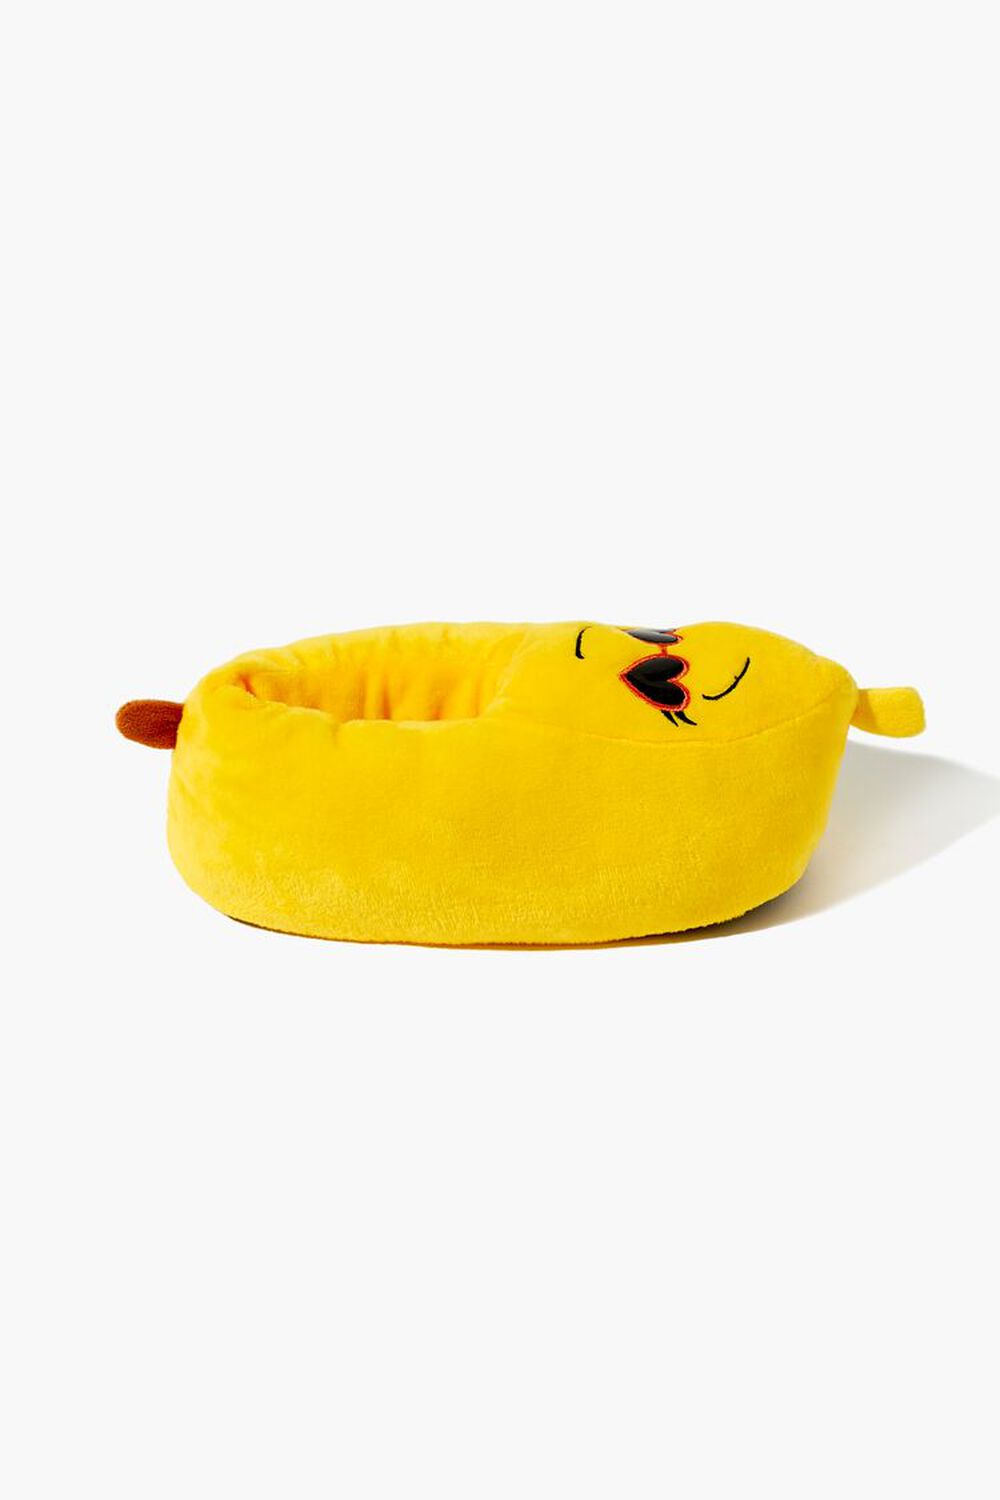 YELLOW Embroidered Banana House Slippers, image 2